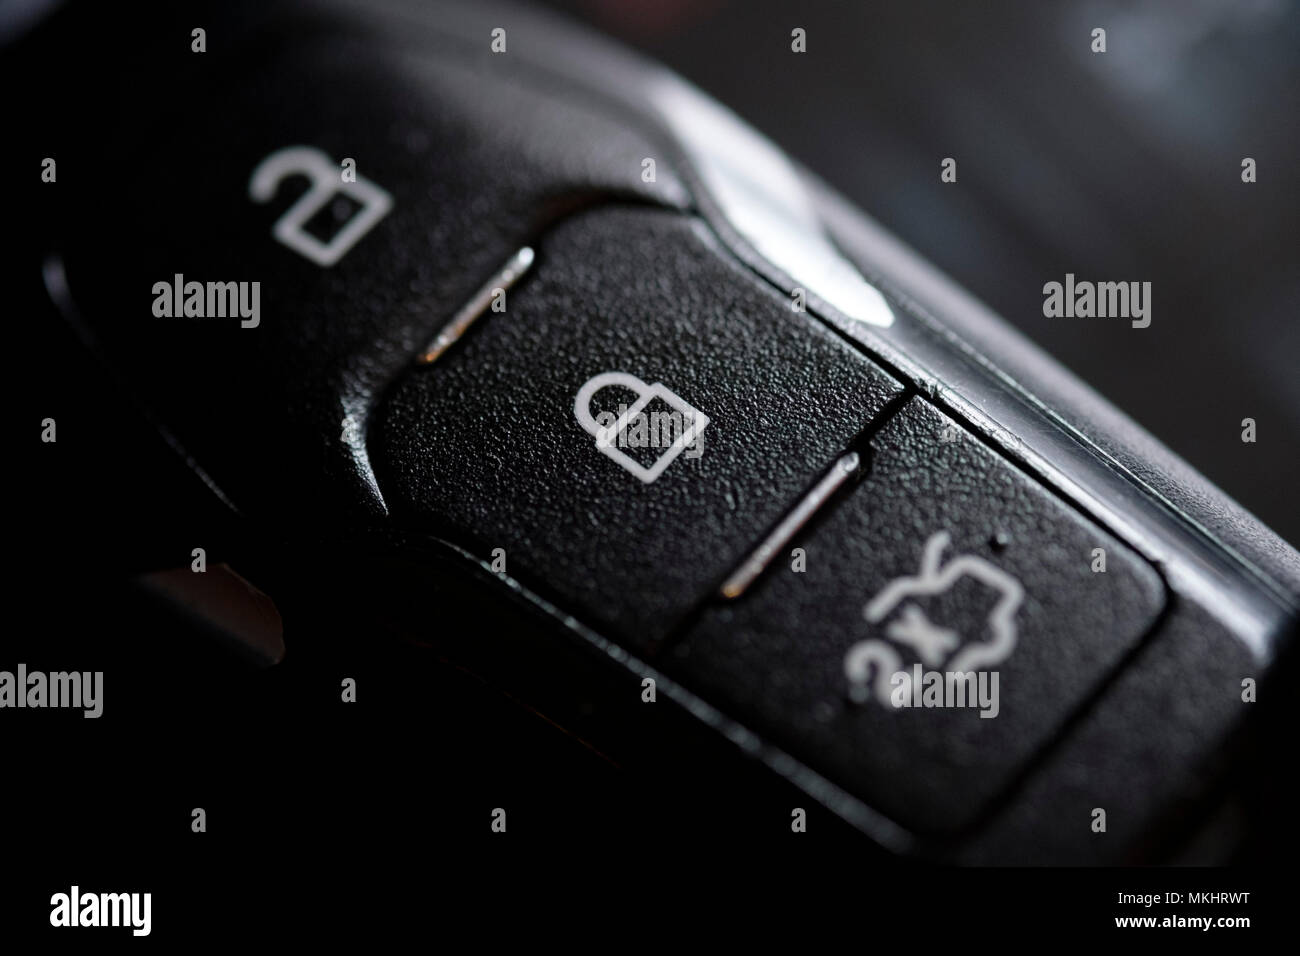 Car keys with remote lock unlock buttons Stock Photo